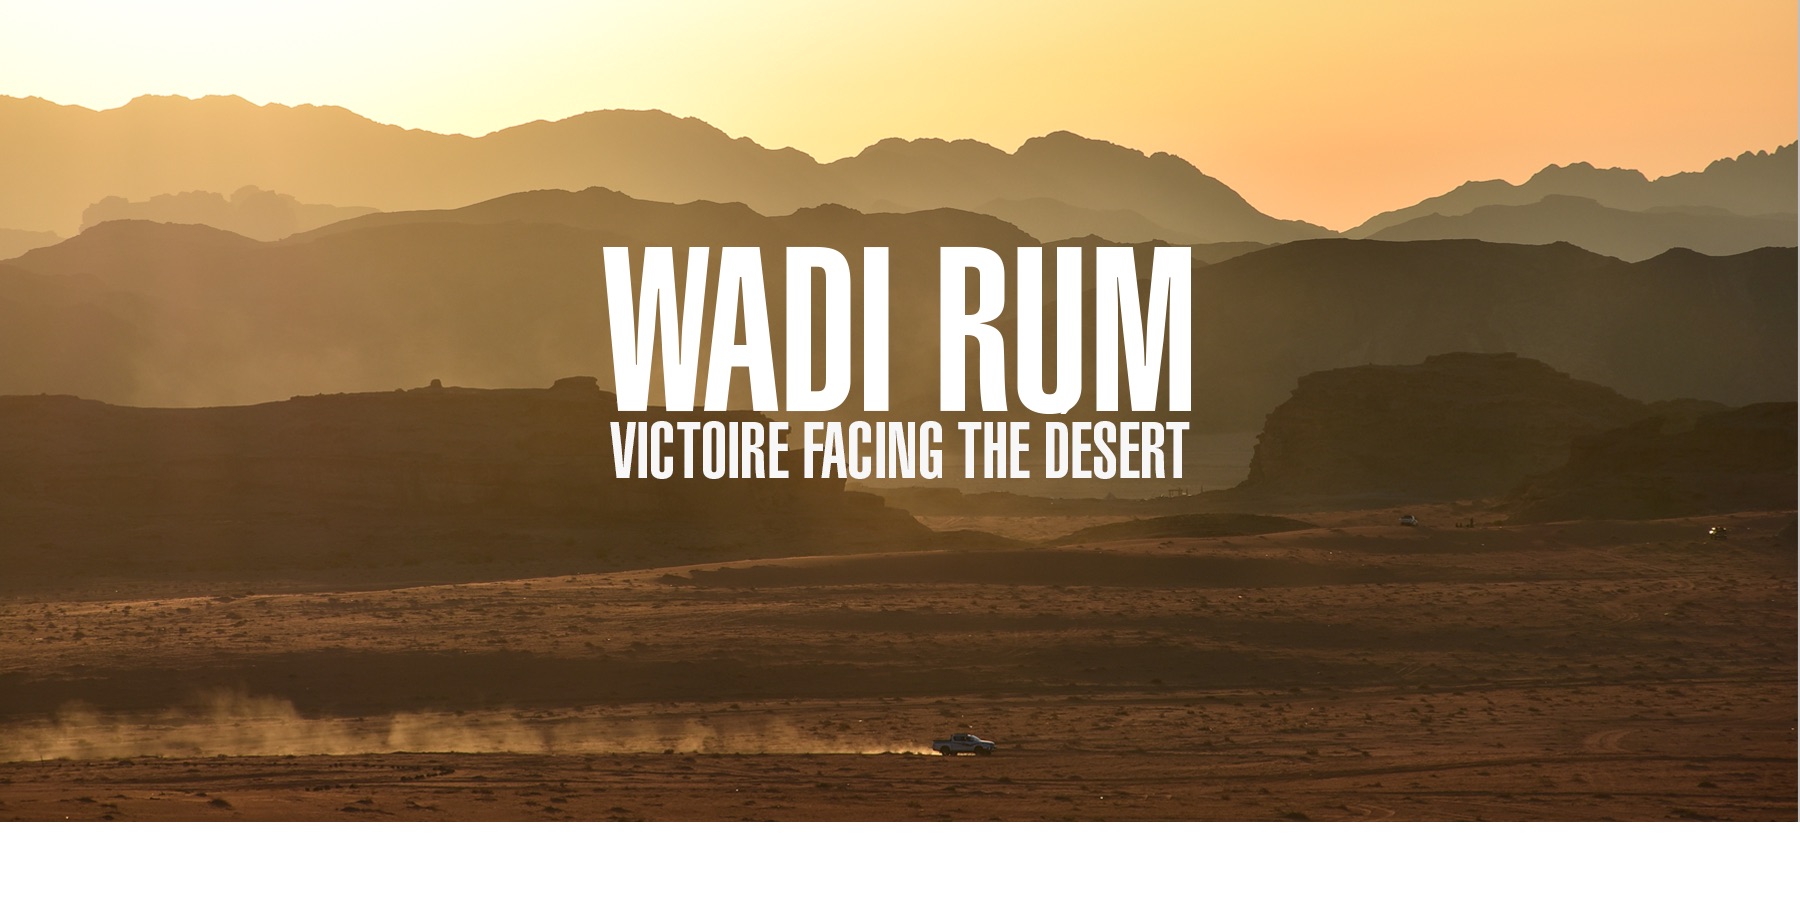 <a href='wadi-rum.html'>A film by Patrice Leconte<br>- in financing -</a>